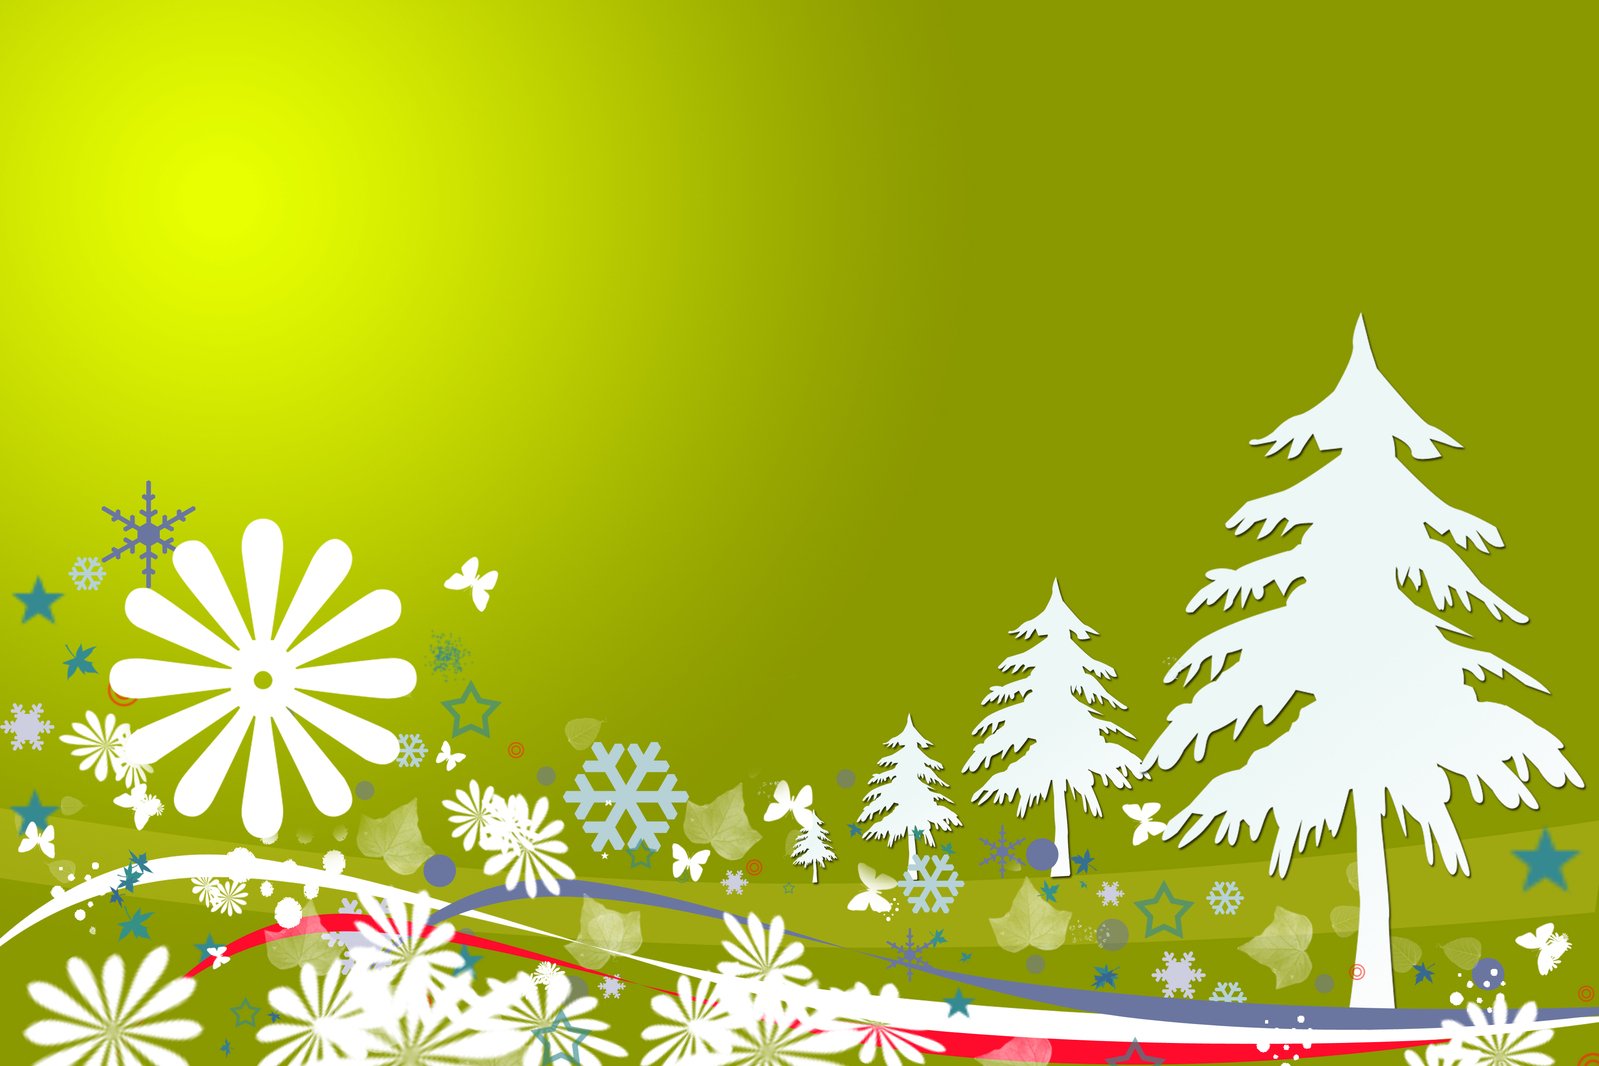 a background with snow flakes, trees and stars